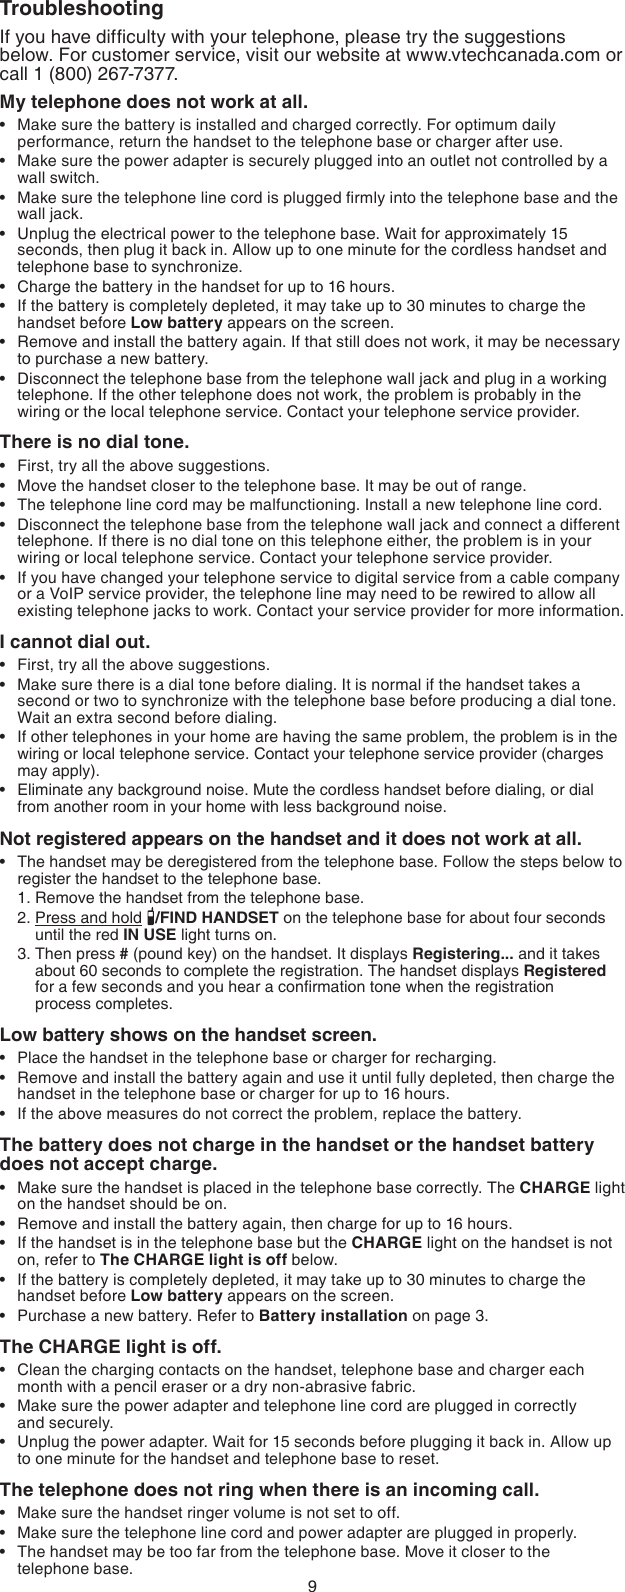 9TroubleshootingIf you have difﬁculty with your telephone, please try the suggestions  below. For customer service, visit our website at www.vtechcanada.com or call 1 (800) 267-7377.My telephone does not work at all.Make sure the battery is installed and charged correctly. For optimum daily performance, return the handset to the telephone base or charger after use.Make sure the power adapter is securely plugged into an outlet not controlled by a wall switch.Make sure the telephone line cord is plugged ﬁrmly into the telephone base and the wall jack.Unplug the electrical power to the telephone base. Wait for approximately 15 seconds, then plug it back in. Allow up to one minute for the cordless handset and telephone base to synchronize.Charge the battery in the handset for up to 16 hours.If the battery is completely depleted, it may take up to 30 minutes to charge the handset before Low battery appears on the screen.Remove and install the battery again. If that still does not work, it may be necessary to purchase a new battery.Disconnect the telephone base from the telephone wall jack and plug in a working telephone. If the other telephone does not work, the problem is probably in the wiring or the local telephone service. Contact your telephone service provider.There is no dial tone.First, try all the above suggestions.Move the handset closer to the telephone base. It may be out of range.The telephone line cord may be malfunctioning. Install a new telephone line cord.Disconnect the telephone base from the telephone wall jack and connect a different telephone. If there is no dial tone on this telephone either, the problem is in your wiring or local telephone service. Contact your telephone service provider.If you have changed your telephone service to digital service from a cable company or a VoIP service provider, the telephone line may need to be rewired to allow all existing telephone jacks to work. Contact your service provider for more information.I cannot dial out.First, try all the above suggestions.Make sure there is a dial tone before dialing. It is normal if the handset takes a second or two to synchronize with the telephone base before producing a dial tone. Wait an extra second before dialing.If other telephones in your home are having the same problem, the problem is in the wiring or local telephone service. Contact your telephone service provider (charges may apply).Eliminate any background noise. Mute the cordless handset before dialing, or dial from another room in your home with less background noise.Not registered appears on the handset and it does not work at all.The handset may be deregistered from the telephone base. Follow the steps below to register the handset to the telephone base.1. Remove the handset from the telephone base.2. Press and hold  /FIND HANDSET on the telephone base for about four seconds      until the red IN USE light turns on.3. Then press # (pound key) on the handset. It displays Registering... and it takes      about 60 seconds to complete the registration. The handset displays Registered      for a few seconds and you hear a conﬁrmation tone when the registration        process completes.Low battery shows on the handset screen.Place the handset in the telephone base or charger for recharging.Remove and install the battery again and use it until fully depleted, then charge the handset in the telephone base or charger for up to 16 hours.If the above measures do not correct the problem, replace the battery.The battery does not charge in the handset or the handset battery does not accept charge.Make sure the handset is placed in the telephone base correctly. The CHARGE light on the handset should be on.Remove and install the battery again, then charge for up to 16 hours.If the handset is in the telephone base but the CHARGE light on the handset is not on, refer to The CHARGE light is off below.If the battery is completely depleted, it may take up to 30 minutes to charge the  handset before Low battery appears on the screen.Purchase a new battery. Refer to Battery installation on page 3.The CHARGE light is off.Clean the charging contacts on the handset, telephone base and charger each month with a pencil eraser or a dry non-abrasive fabric.Make sure the power adapter and telephone line cord are plugged in correctly    and securely.Unplug the power adapter. Wait for 15 seconds before plugging it back in. Allow up to one minute for the handset and telephone base to reset.The telephone does not ring when there is an incoming call.Make sure the handset ringer volume is not set to off. Make sure the telephone line cord and power adapter are plugged in properly.The handset may be too far from the telephone base. Move it closer to the  telephone base.••••••••••••••••••••••••••••••••